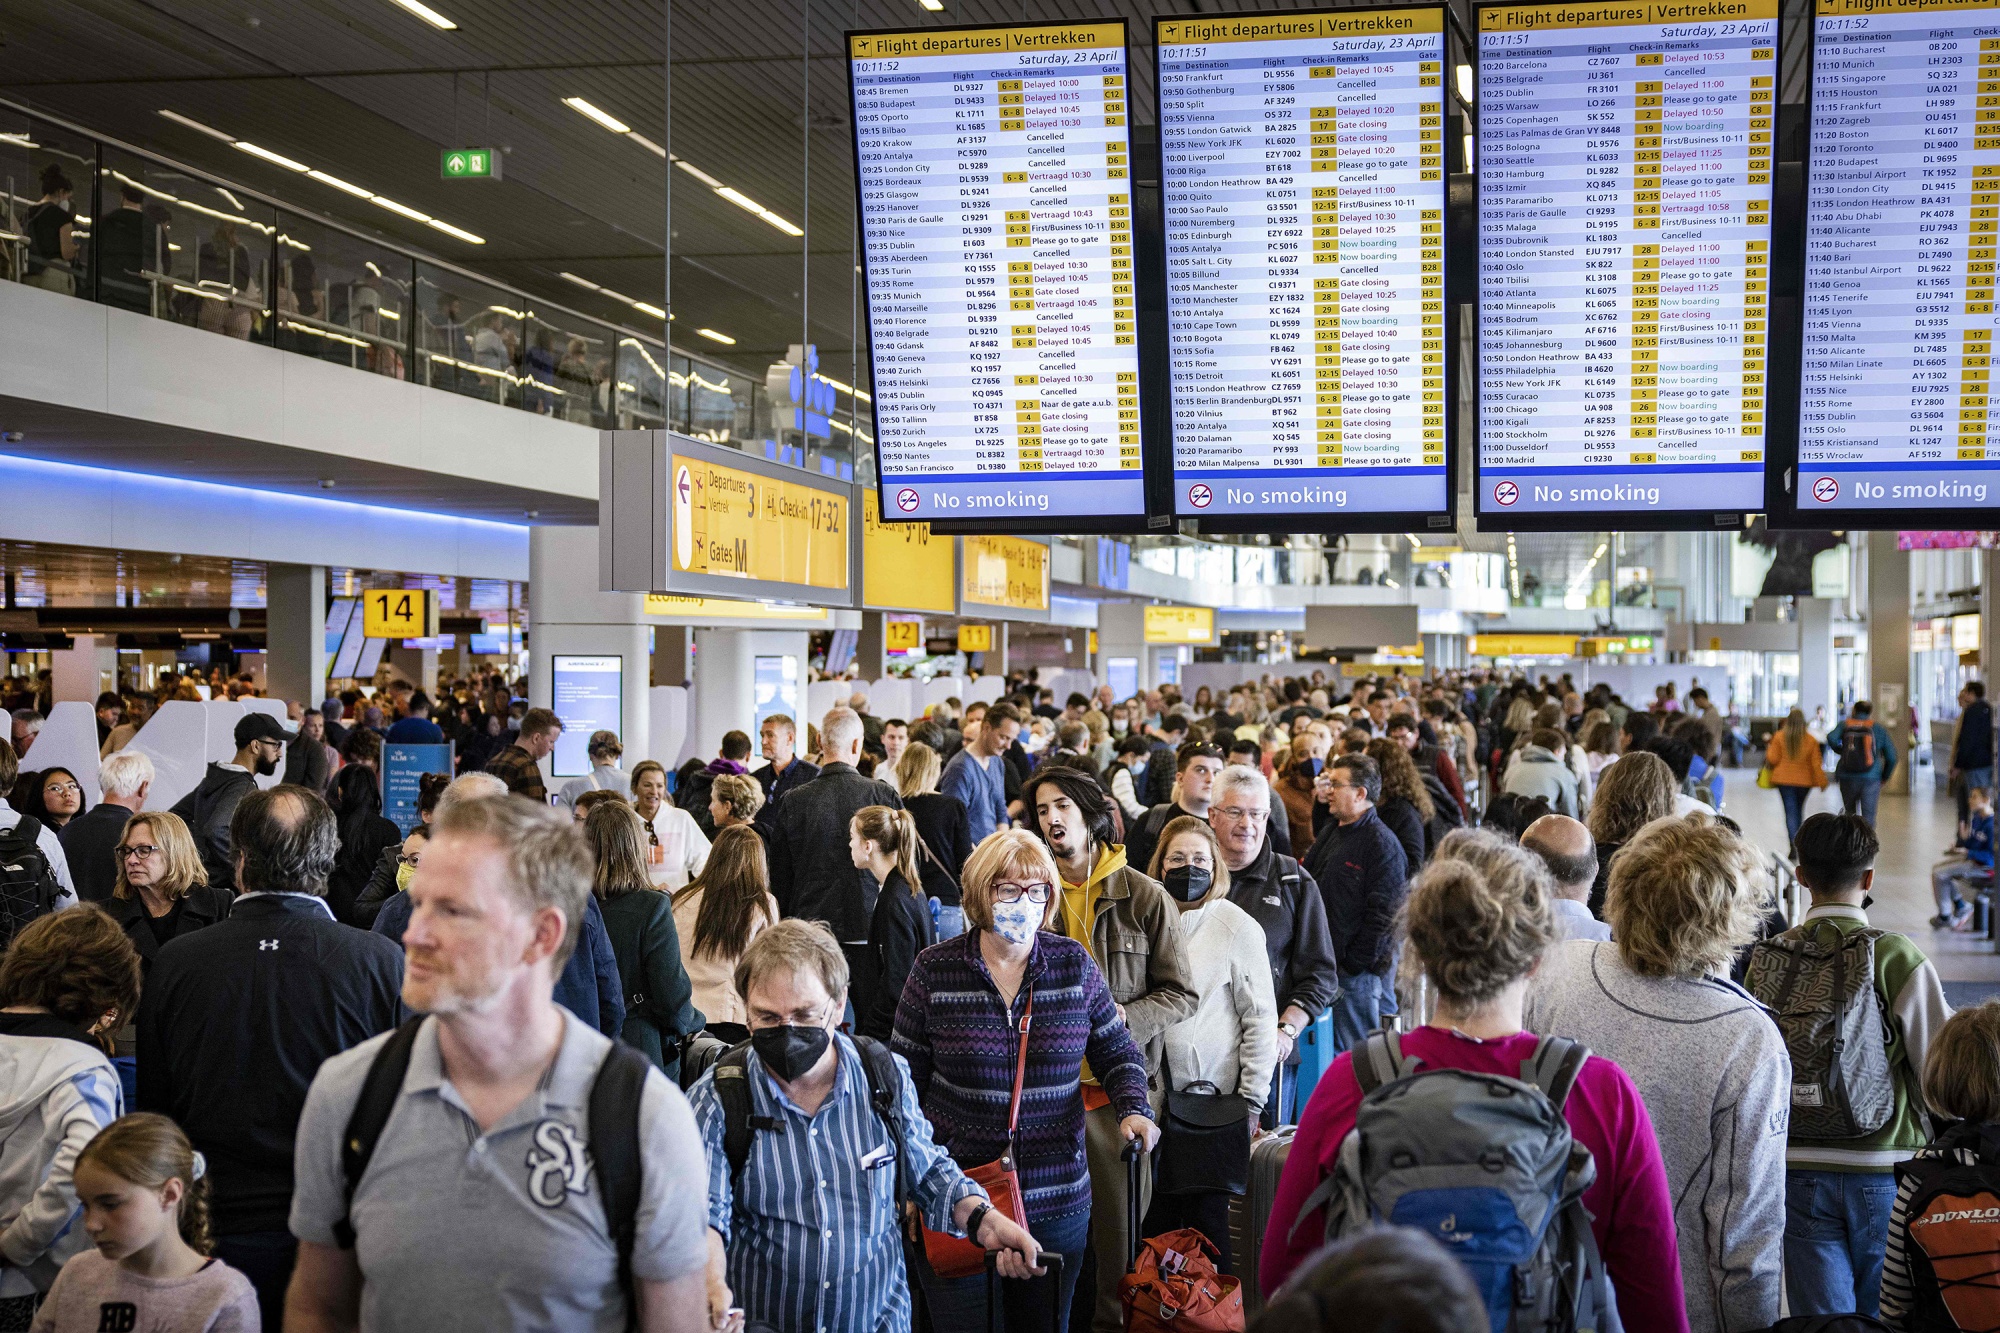 Record Flight Delays, Cancellations Make Europe 2022's Worst Place to Travel - Bloomberg